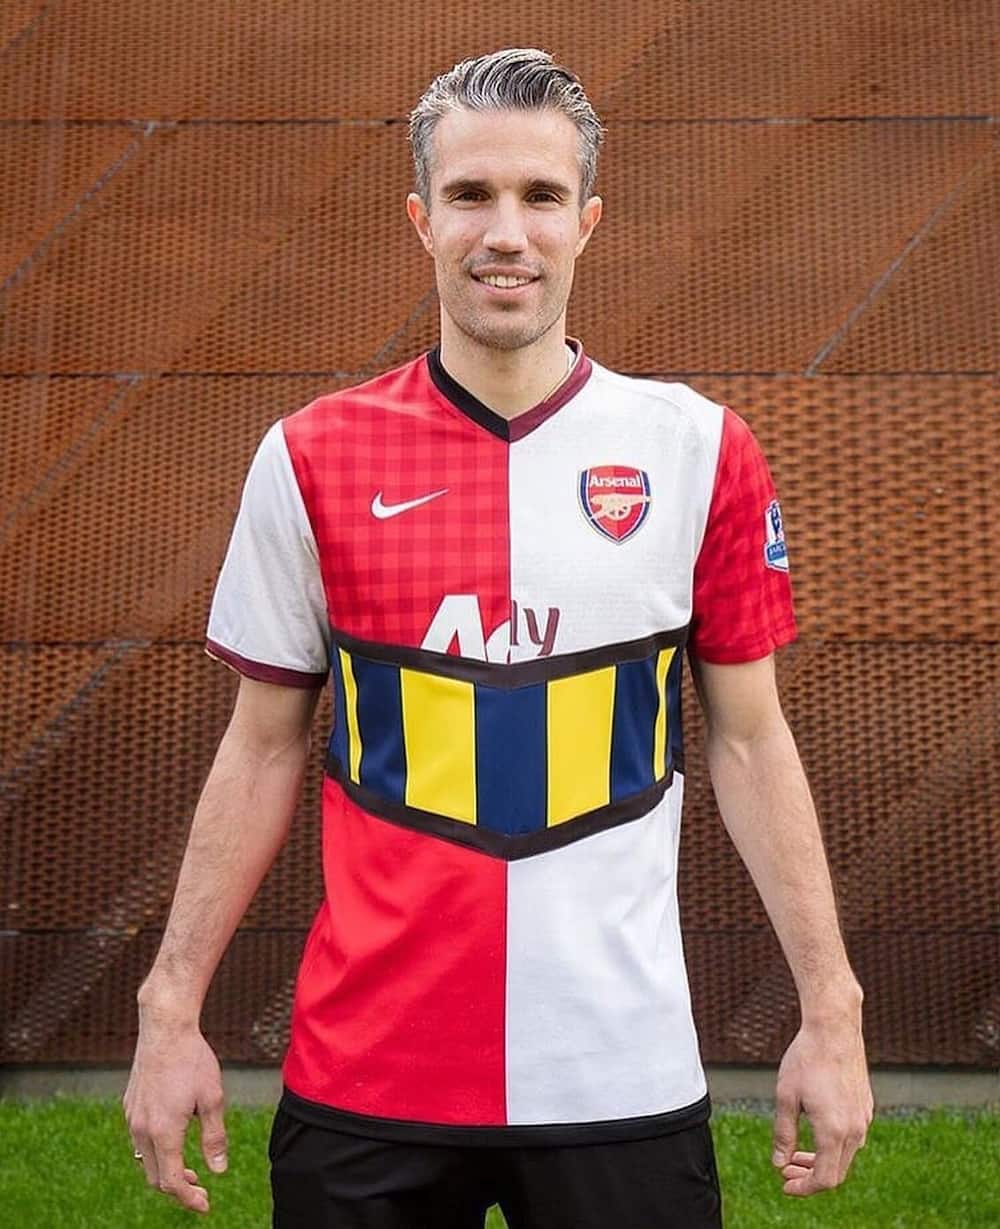 What are some of Robin van Persie's honours?